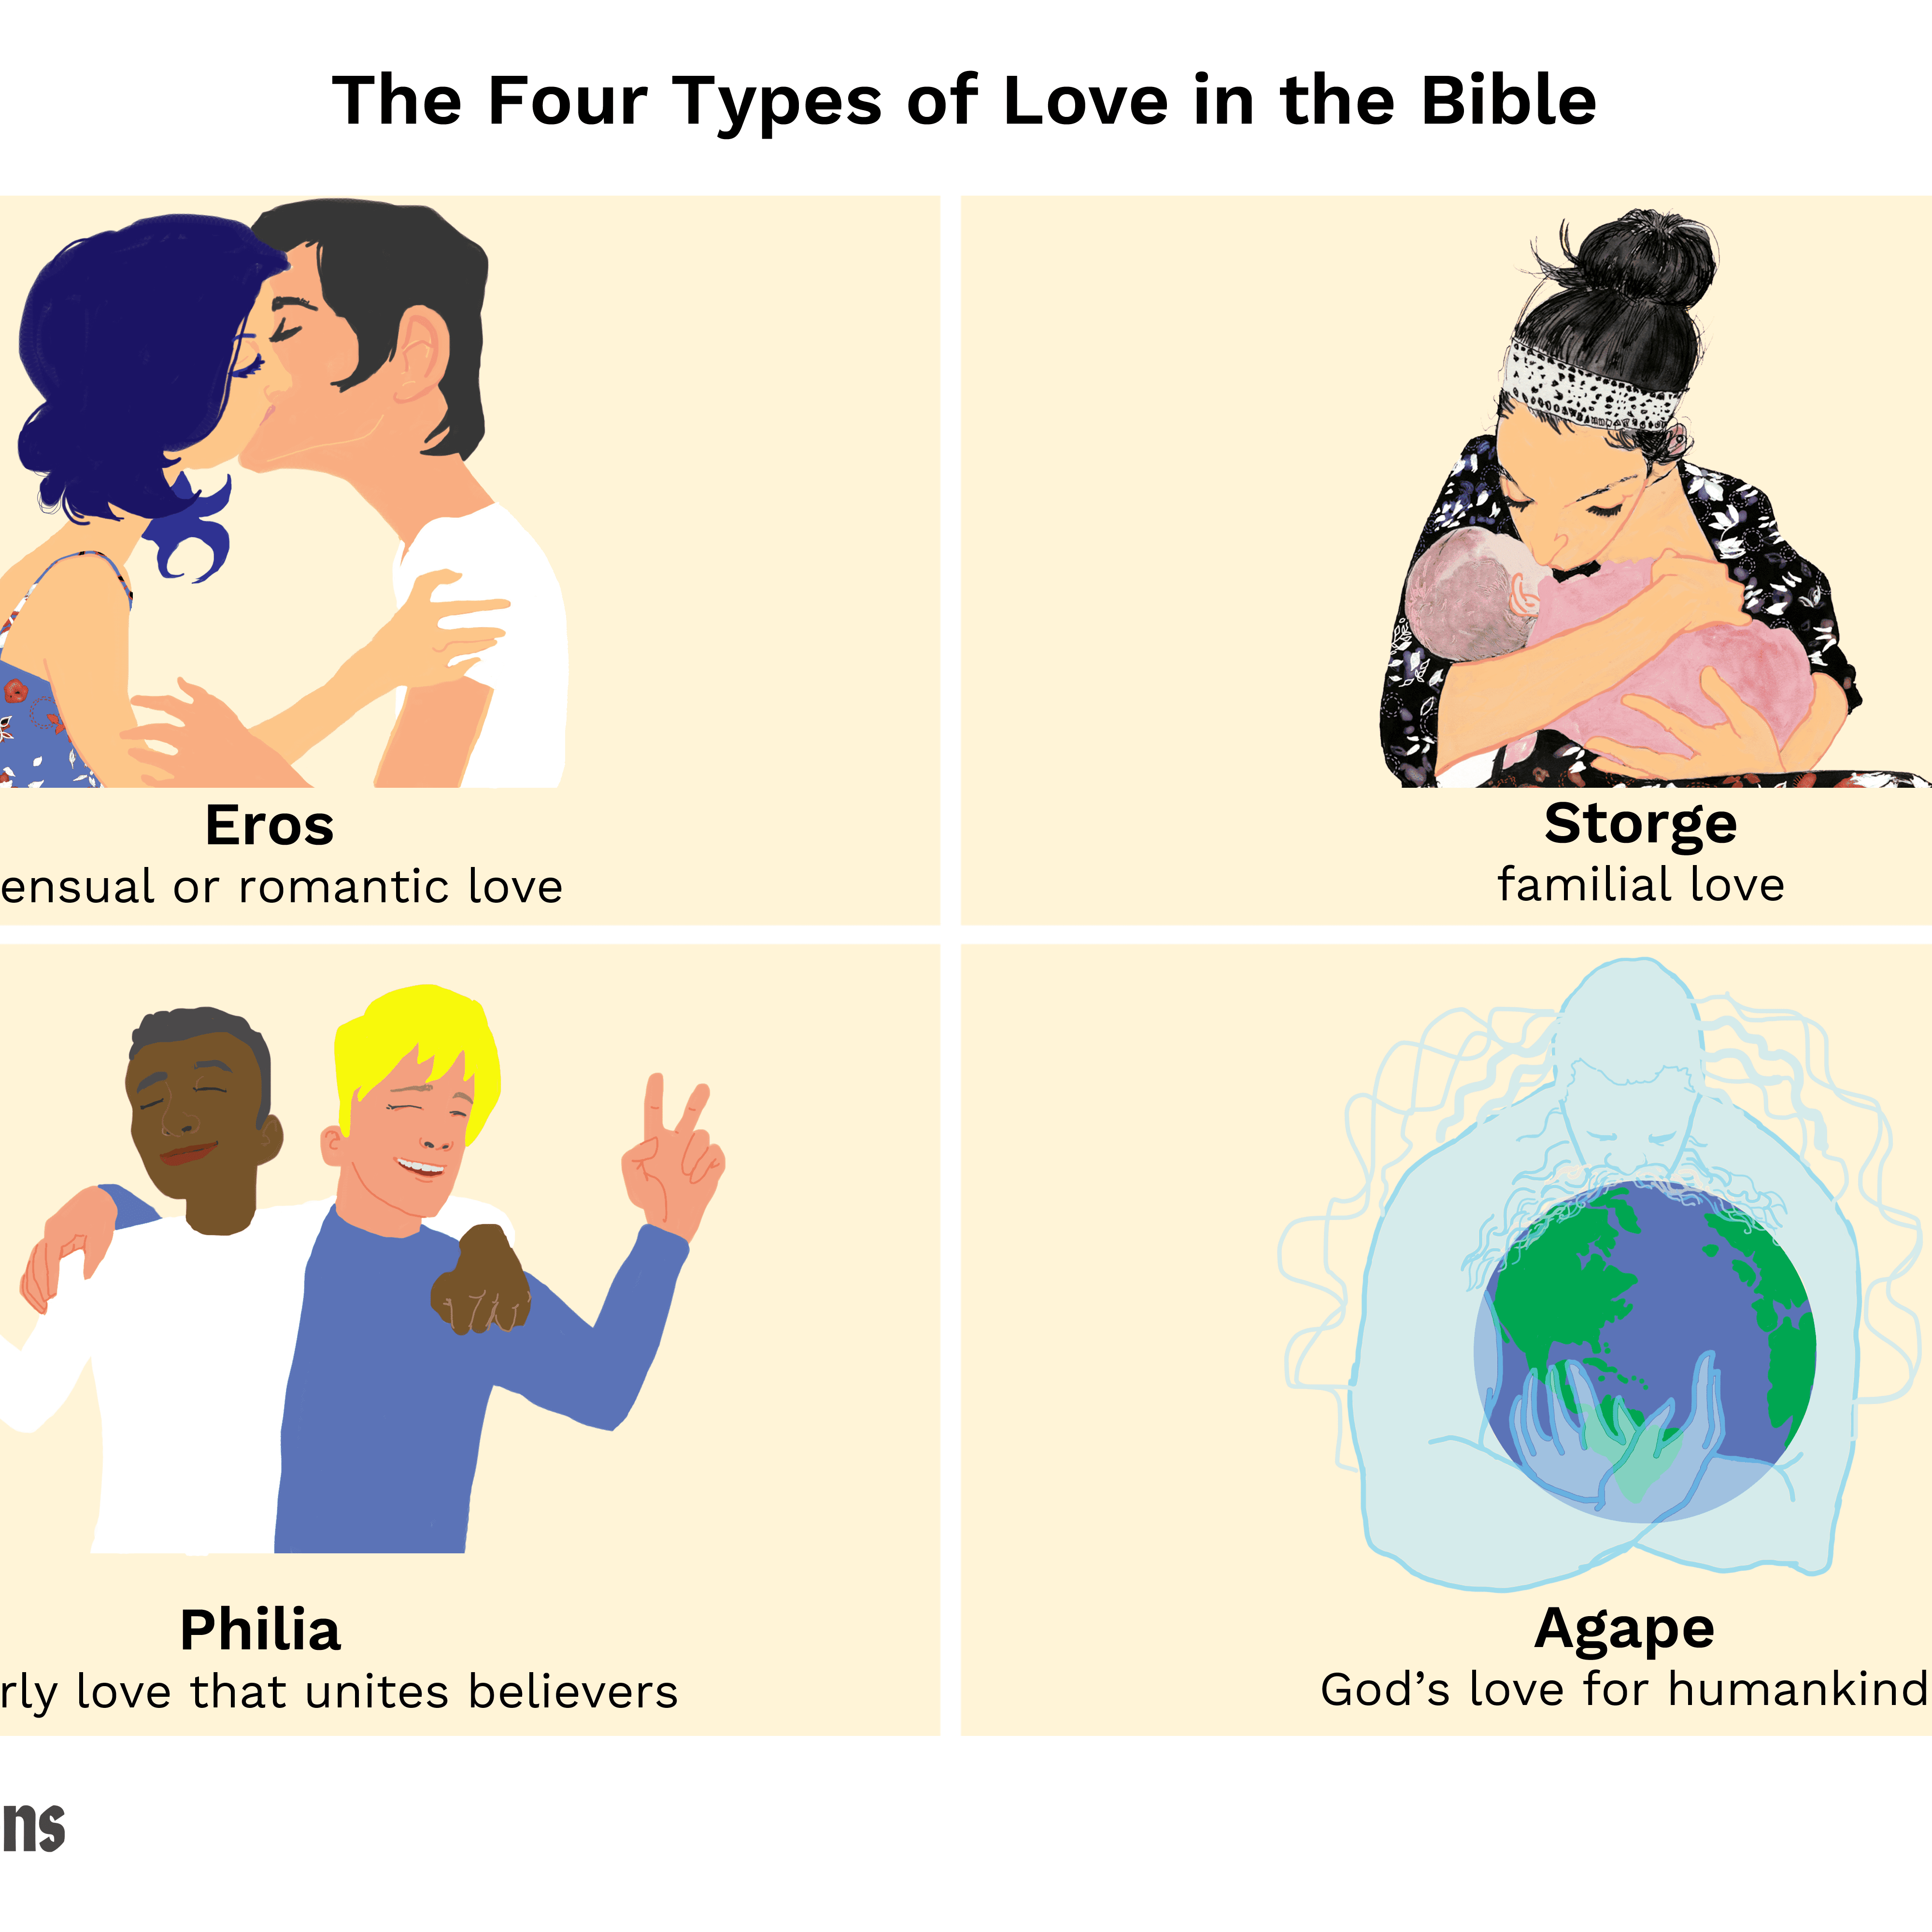 What is the symbol for Love in the Bible?